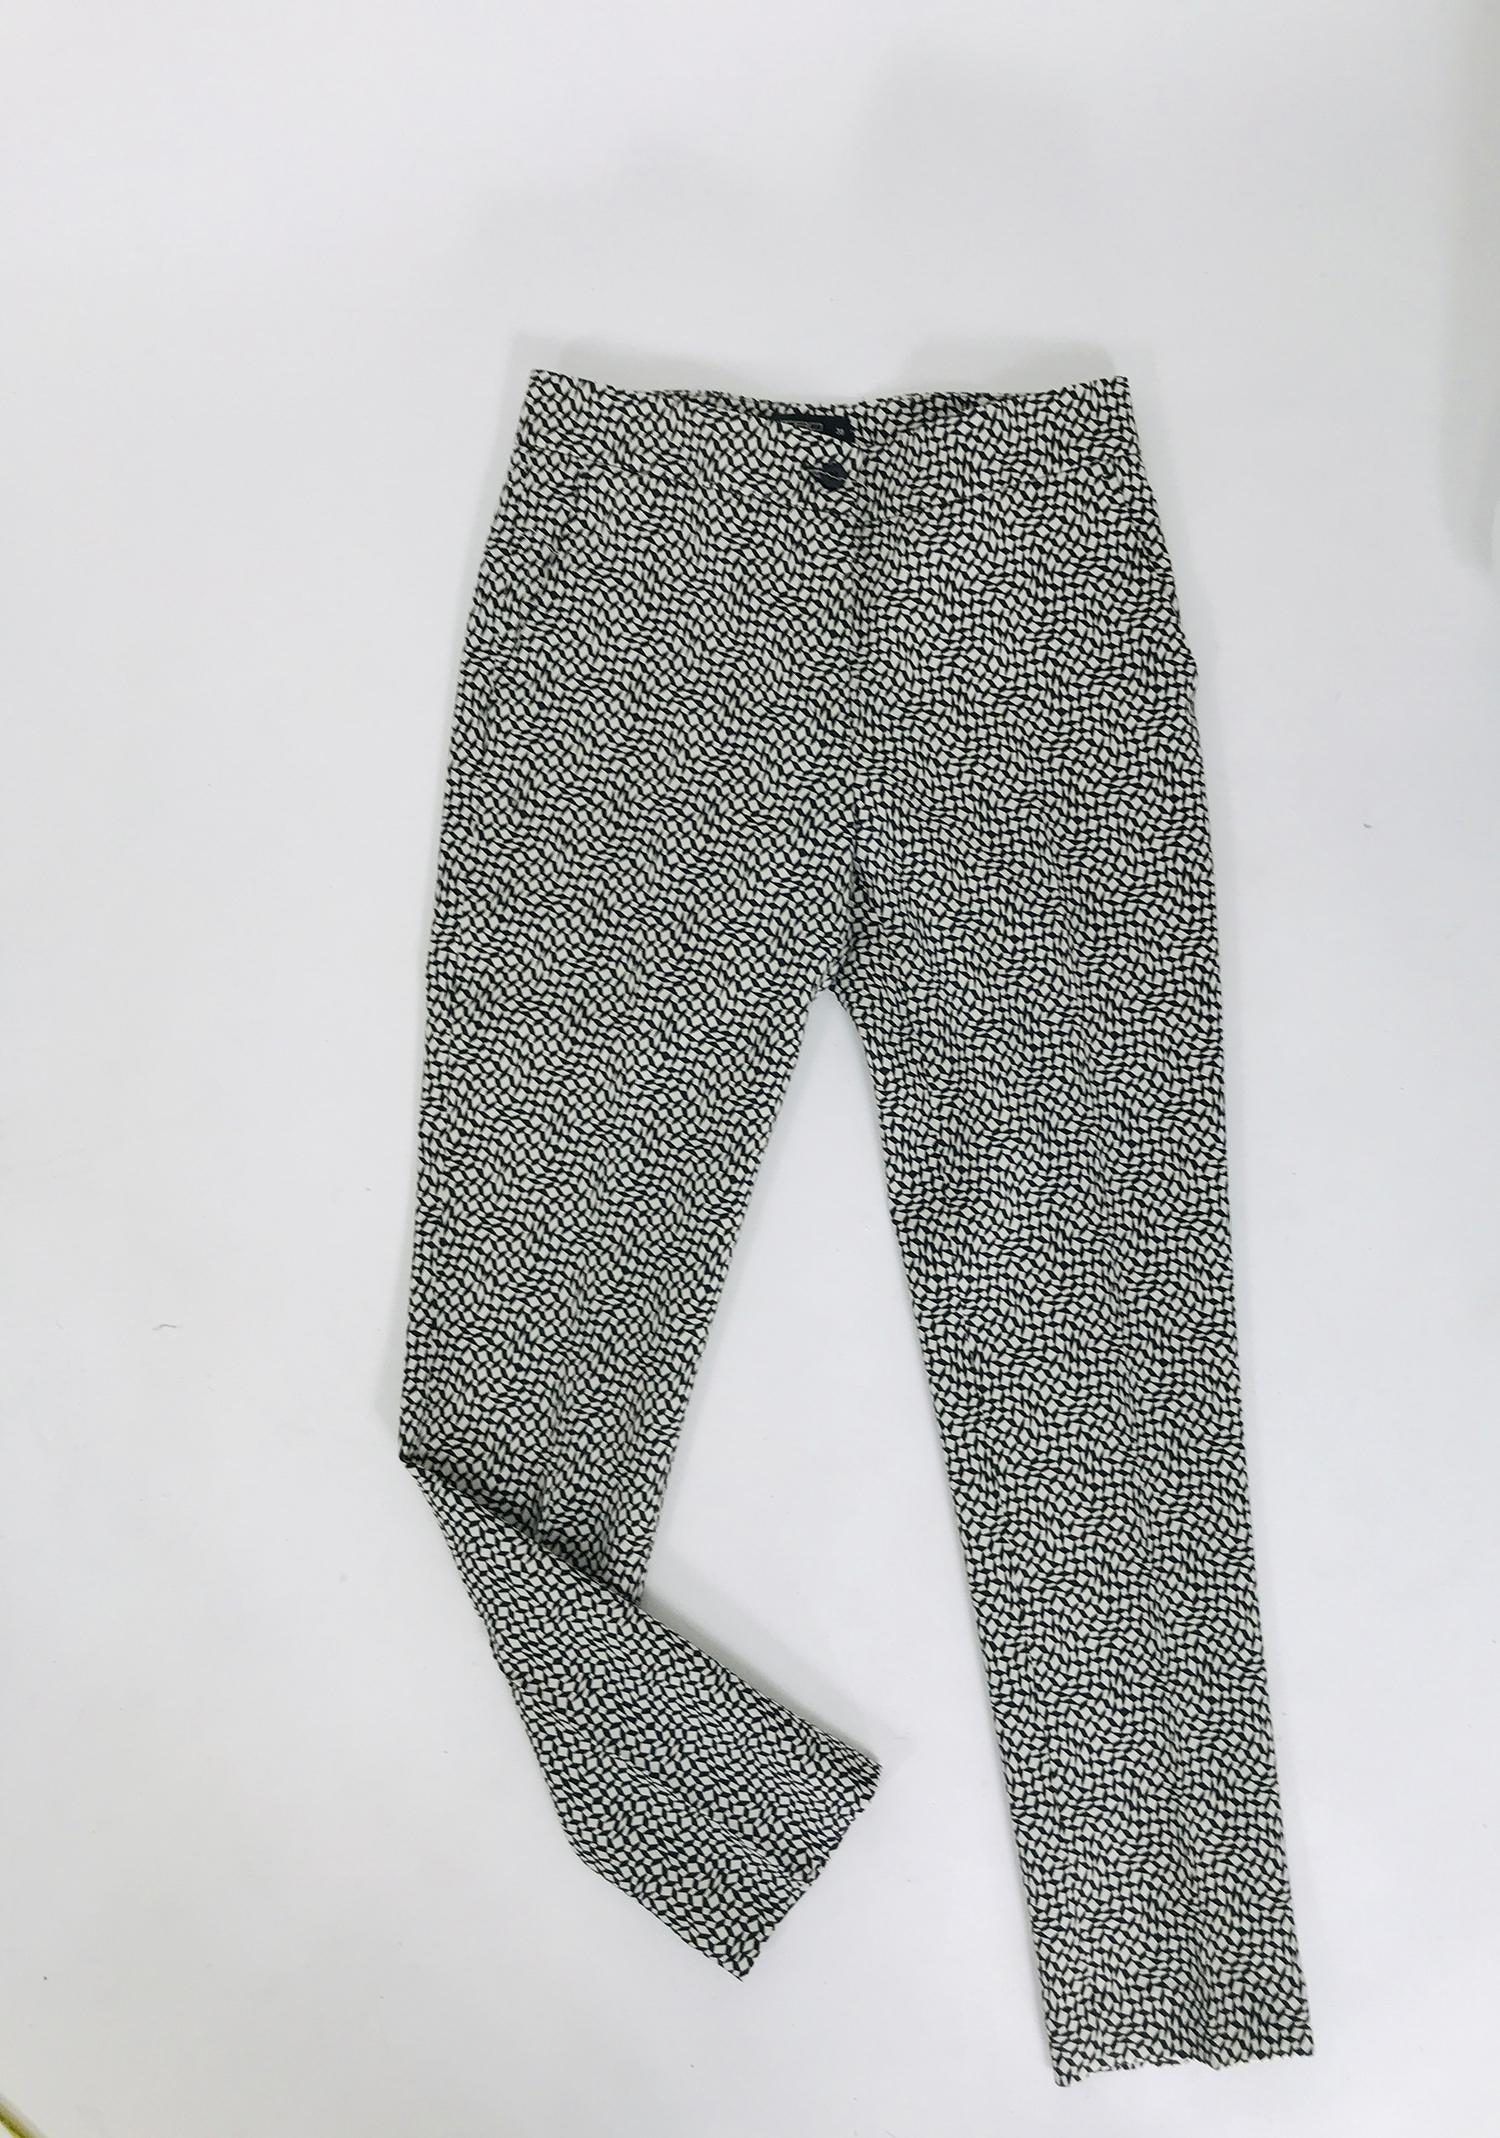 Etro black & white diamonds & squares print wool trousers marked size 38.
Flat front trouser with tapered legs, fly front angled hip pockets. Back besom pockets at hips. Soft fine woven wool with elastan for a bit of stretch. Unlined. Looks barely,